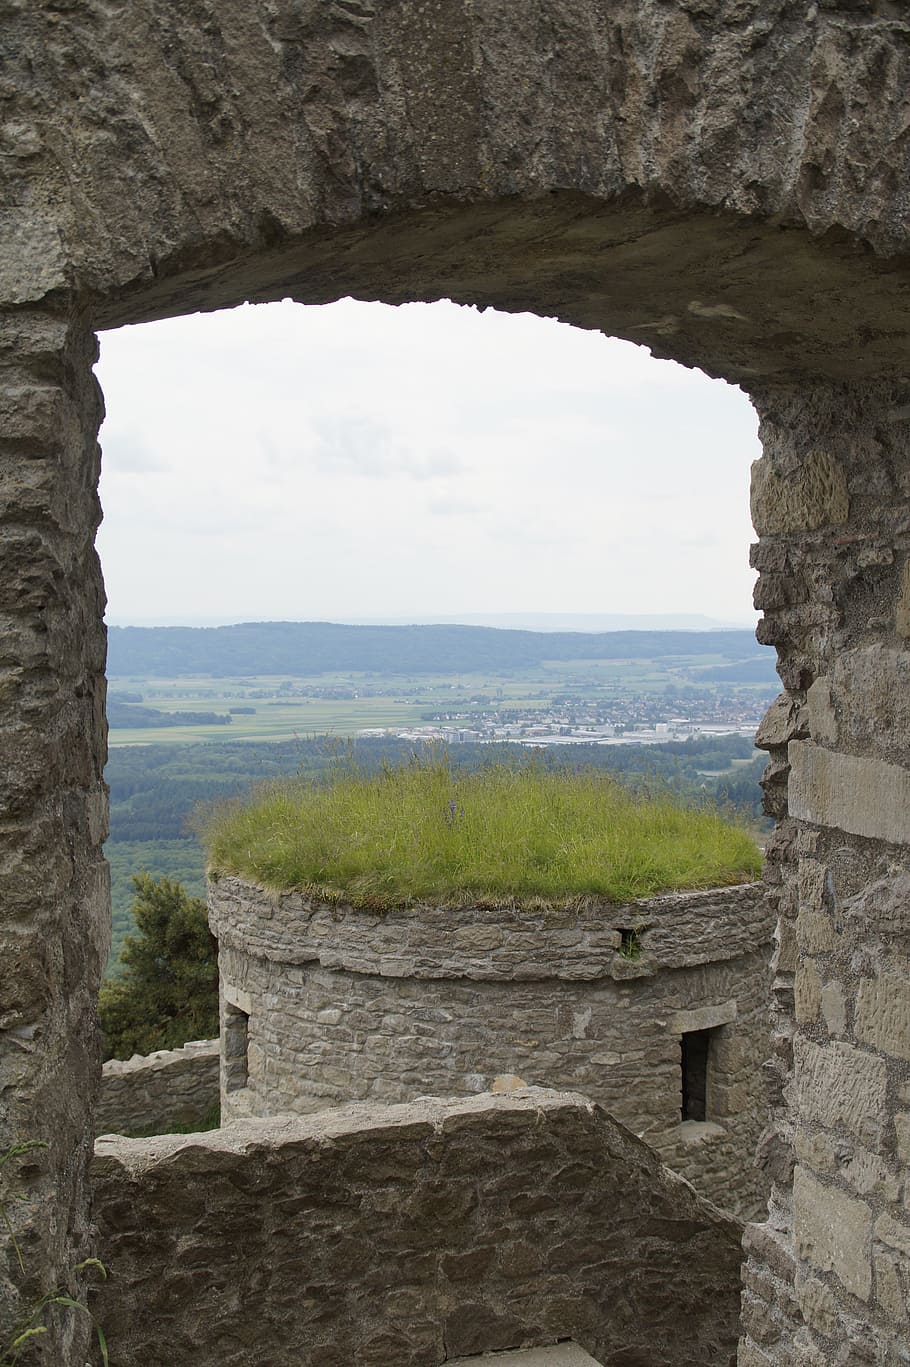 castle, ruin, middle ages, hohentwiel, hegau, lake constance, sing, volcano, old, masonry